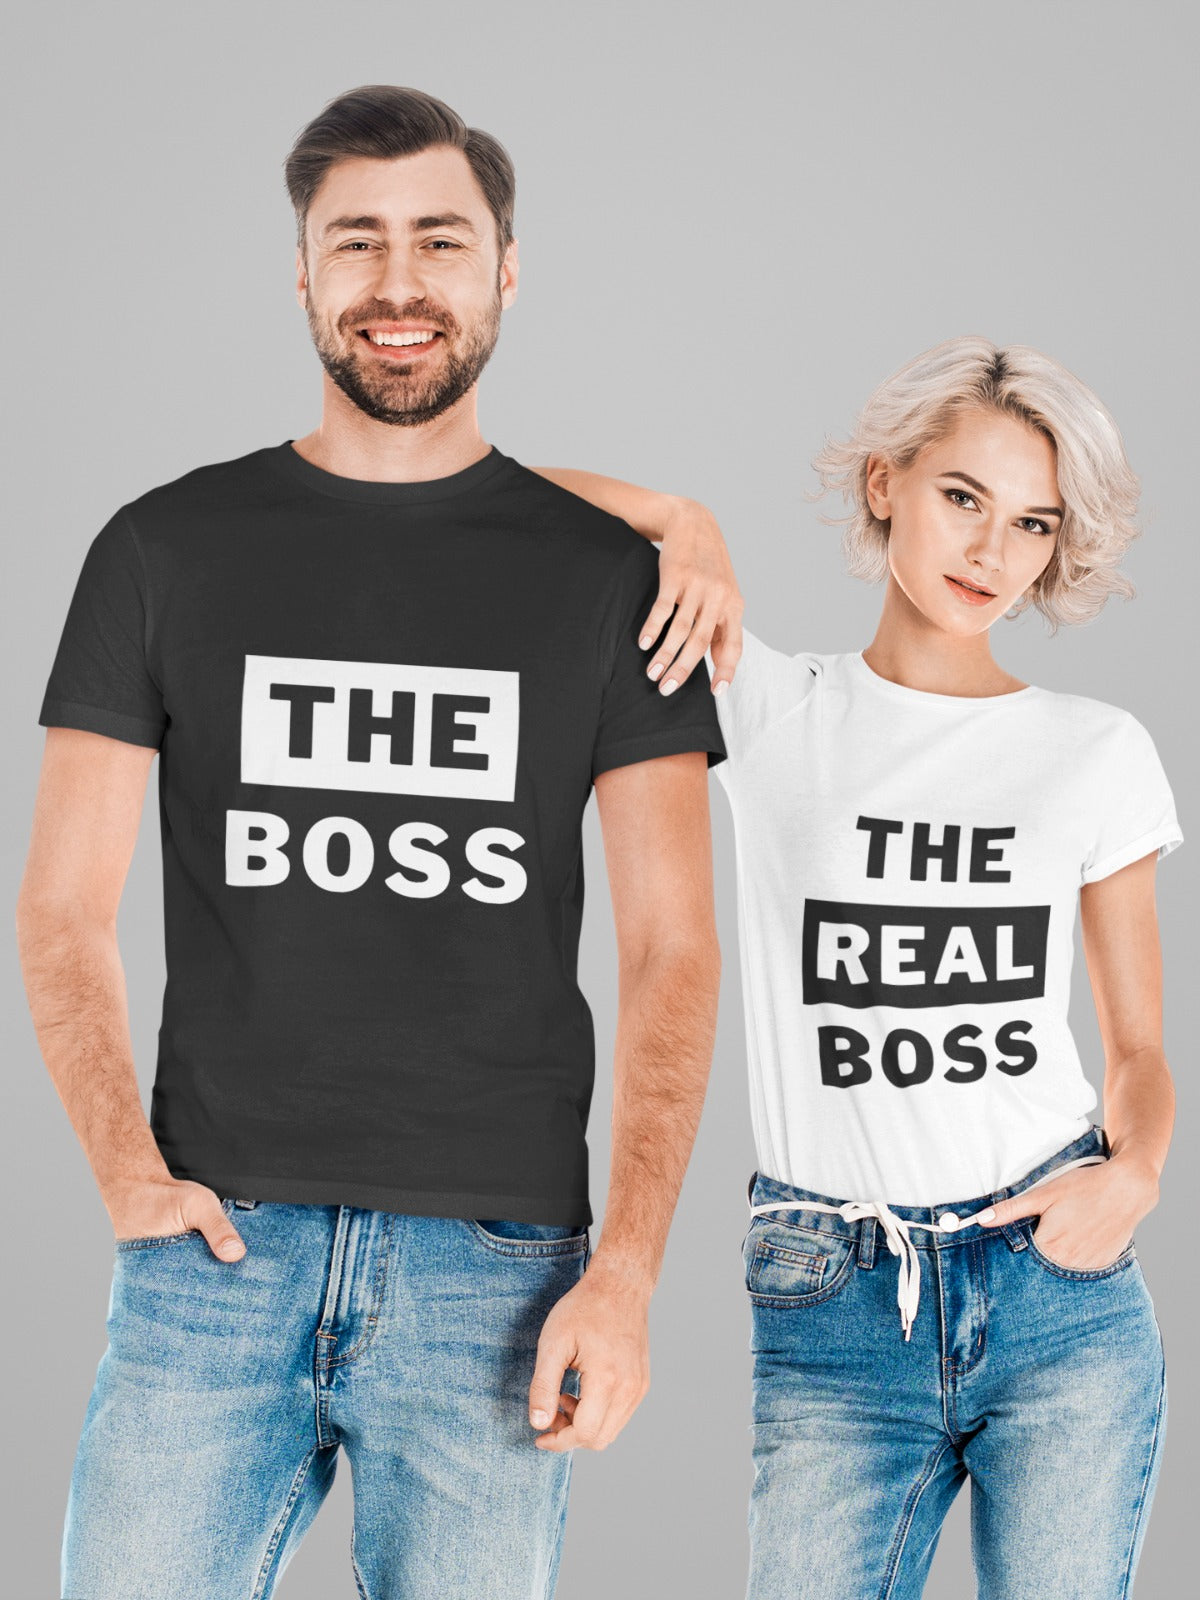 Our couple t-shirt set featuring "The Boss" and "The Real Boss" designs is the perfect way to show off your relationship in style. Made from high-quality materials, these t-shirts are comfortable and versatile, suitable for any occasion. Order yours today and let everyone know who's really in charge in your relationship!